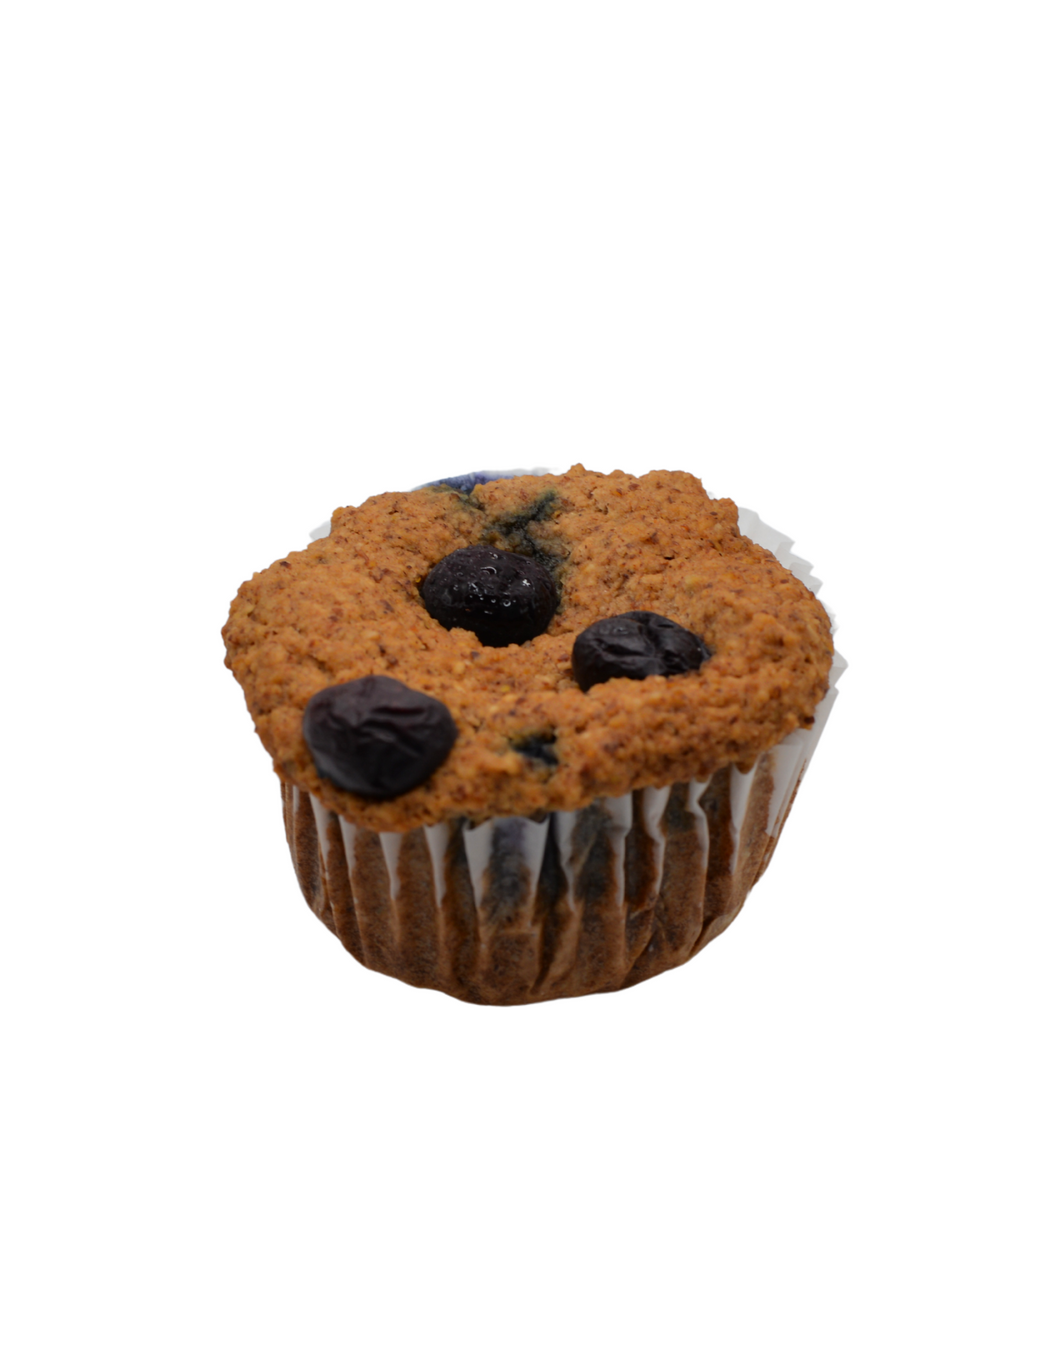 Molly's Blueberry Muffins